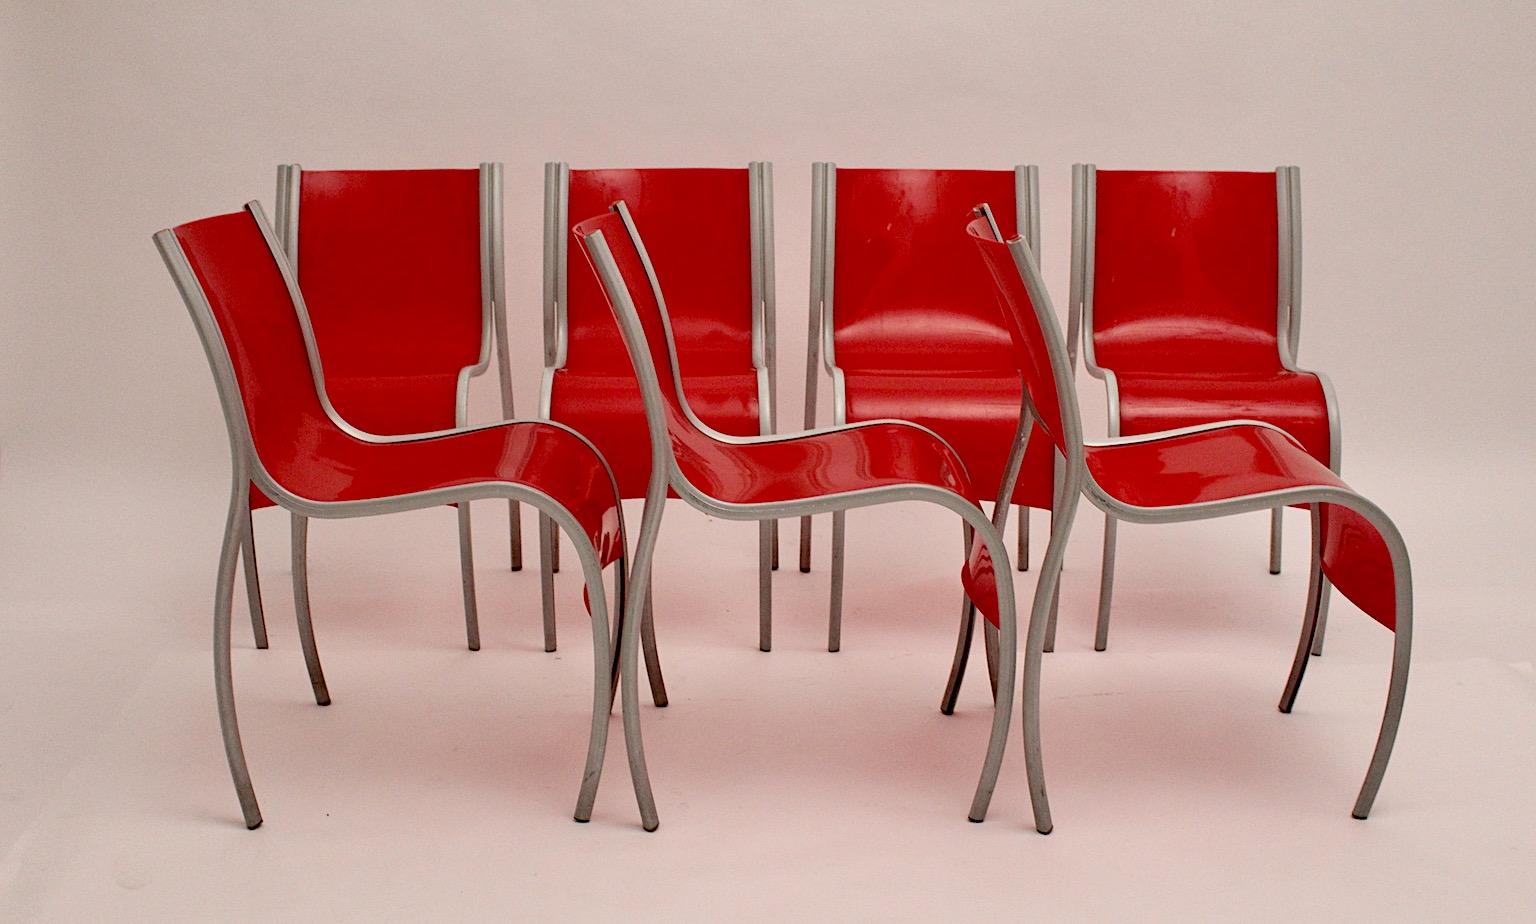 Late 20th Century Modern Red Plastic Vintage Seven Dining Chairs Ron Arad for Kartell  1999 Italy For Sale